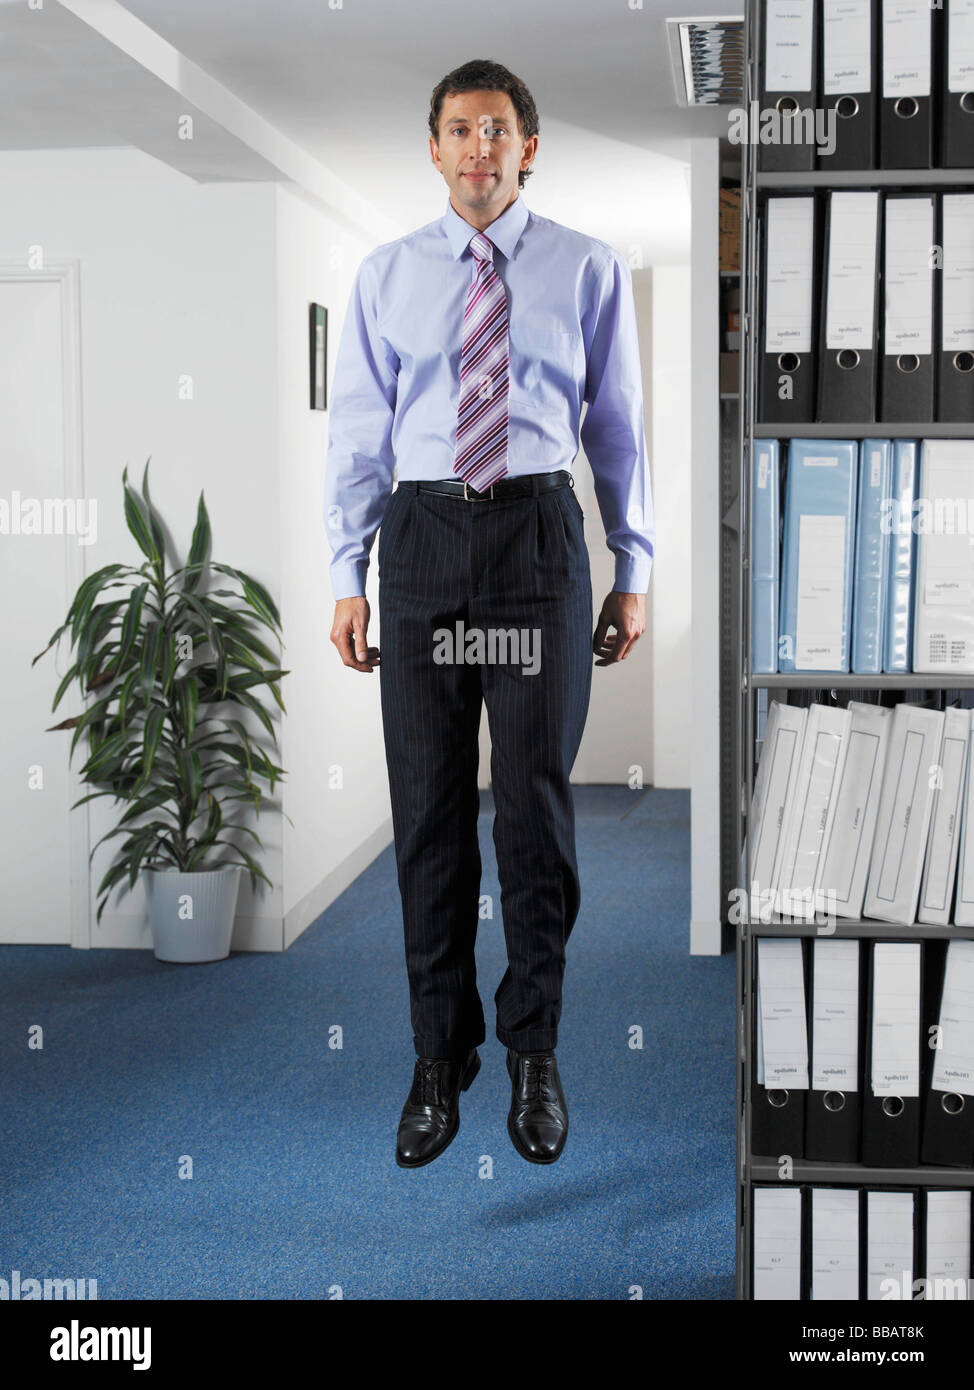 Office worker jumping in office Stock Photo